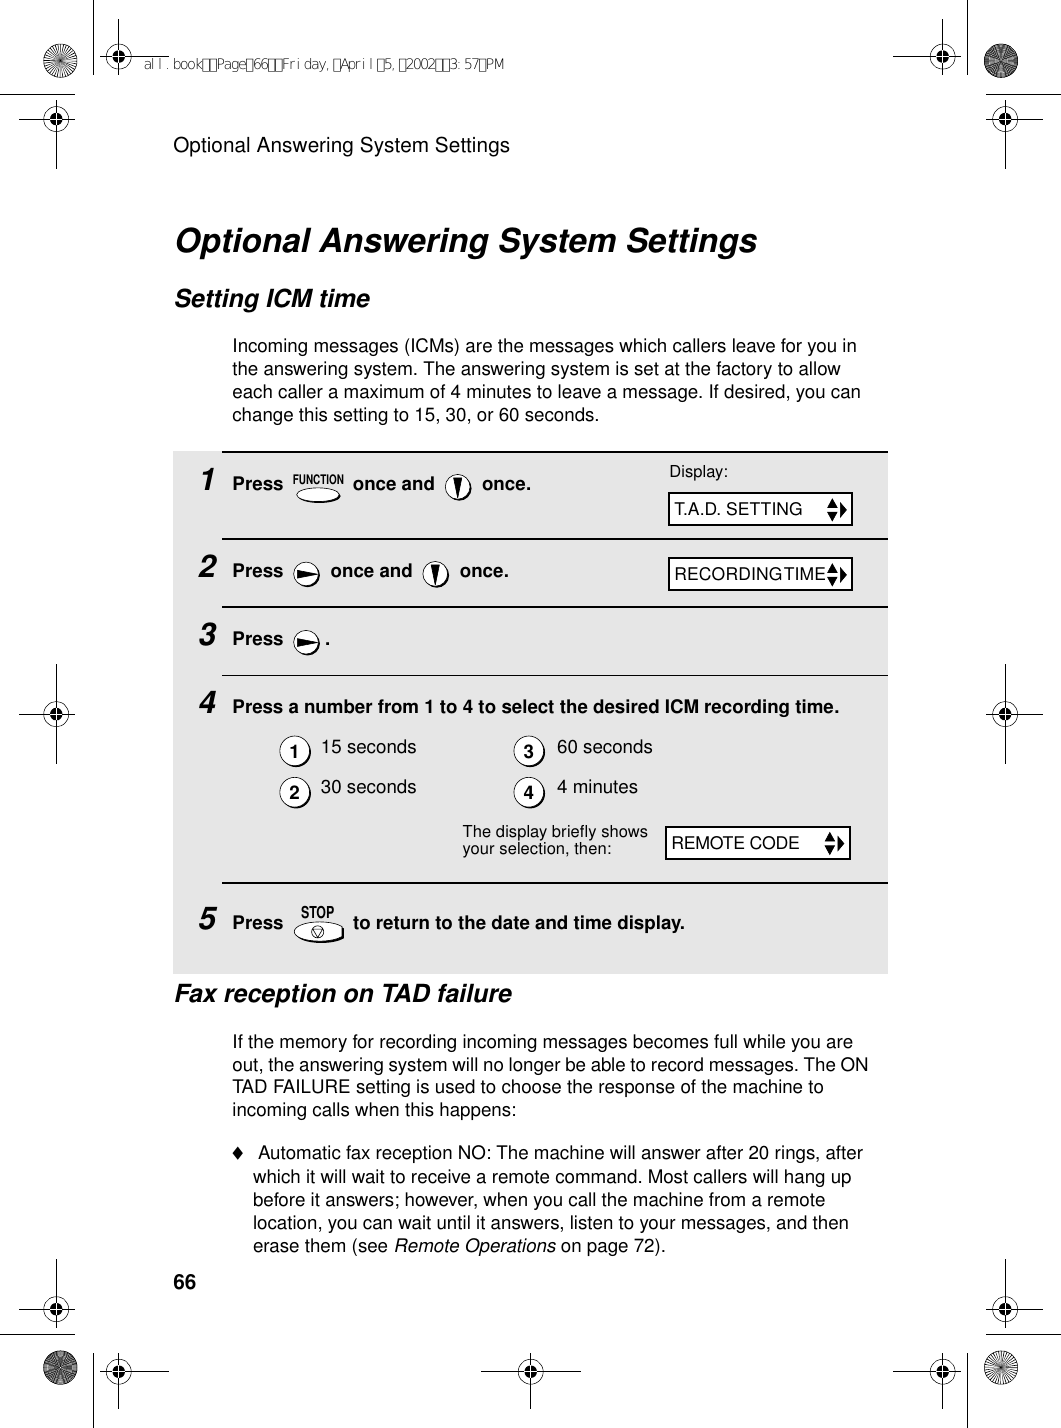 Optional Answering System Settings661Press   once and   once.2Press   once and   once.3Press .4Press a number from 1 to 4 to select the desired ICM recording time.5Press   to return to the date and time display.15 seconds 60 seconds30 seconds 4 minutesFUNCTIONSTOPOptional Answering System SettingsSetting ICM timeIncoming messages (ICMs) are the messages which callers leave for you in the answering system. The answering system is set at the factory to allow each caller a maximum of 4 minutes to leave a message. If desired, you can change this setting to 15, 30, or 60 seconds.Display:T.A.D. SETTINGRECORDING TIME1234The display briefly shows your selection, then:REMOTE CODEFax reception on TAD failureIf the memory for recording incoming messages becomes full while you are out, the answering system will no longer be able to record messages. The ON TAD FAILURE setting is used to choose the response of the machine to incoming calls when this happens:♦ Automatic fax reception NO: The machine will answer after 20 rings, after which it will wait to receive a remote command. Most callers will hang up before it answers; however, when you call the machine from a remote location, you can wait until it answers, listen to your messages, and then erase them (see Remote Operations on page 72).all.bookPage66Friday,April5,20023:57PM